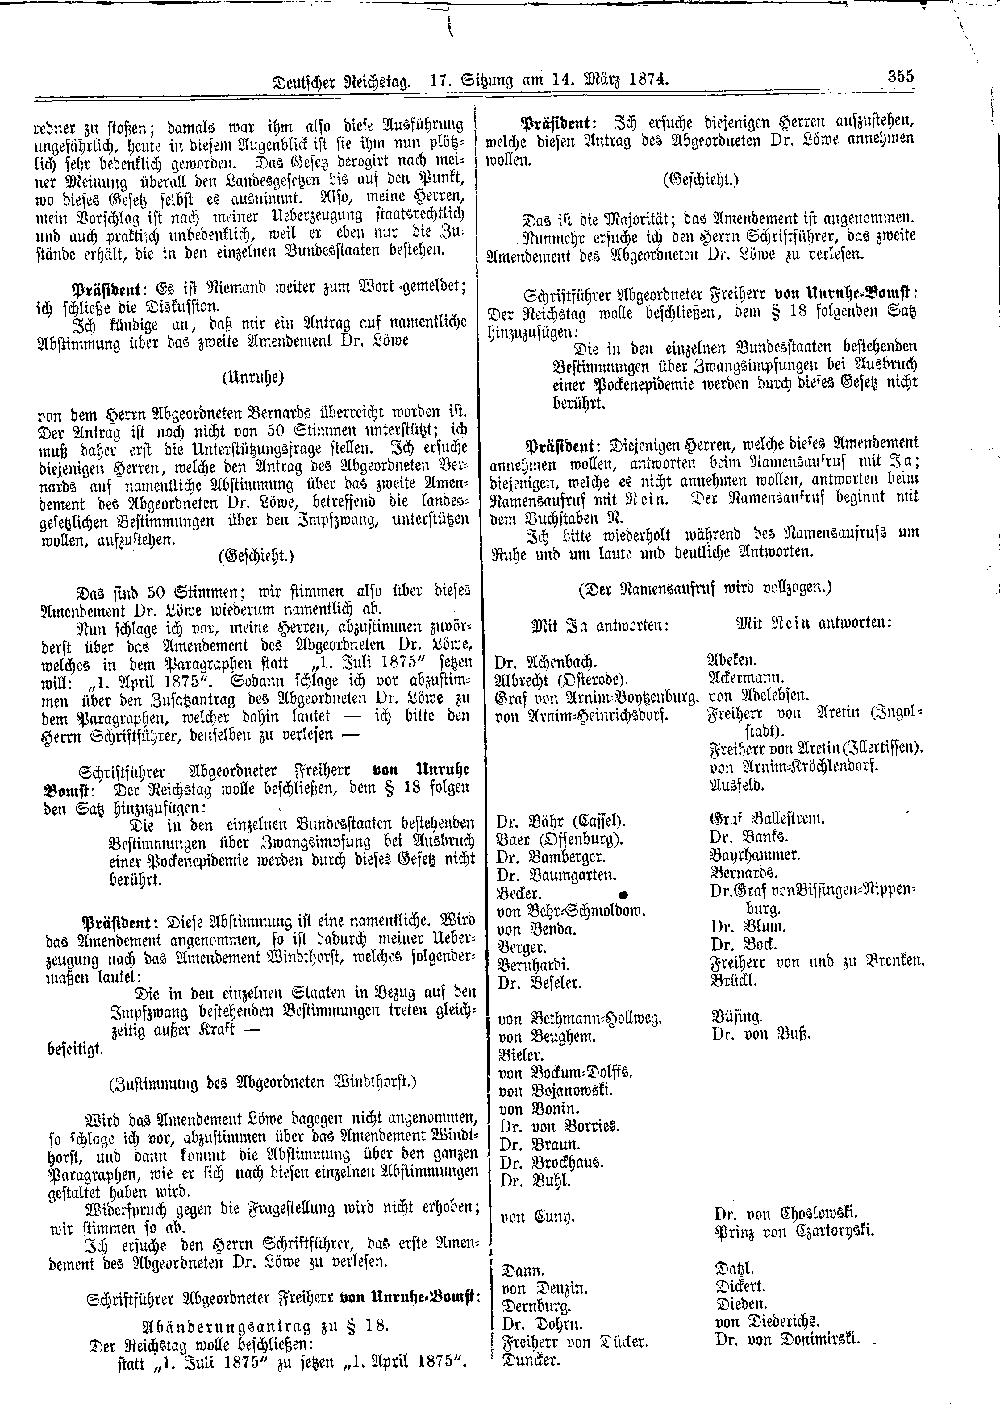 Scan of page 355